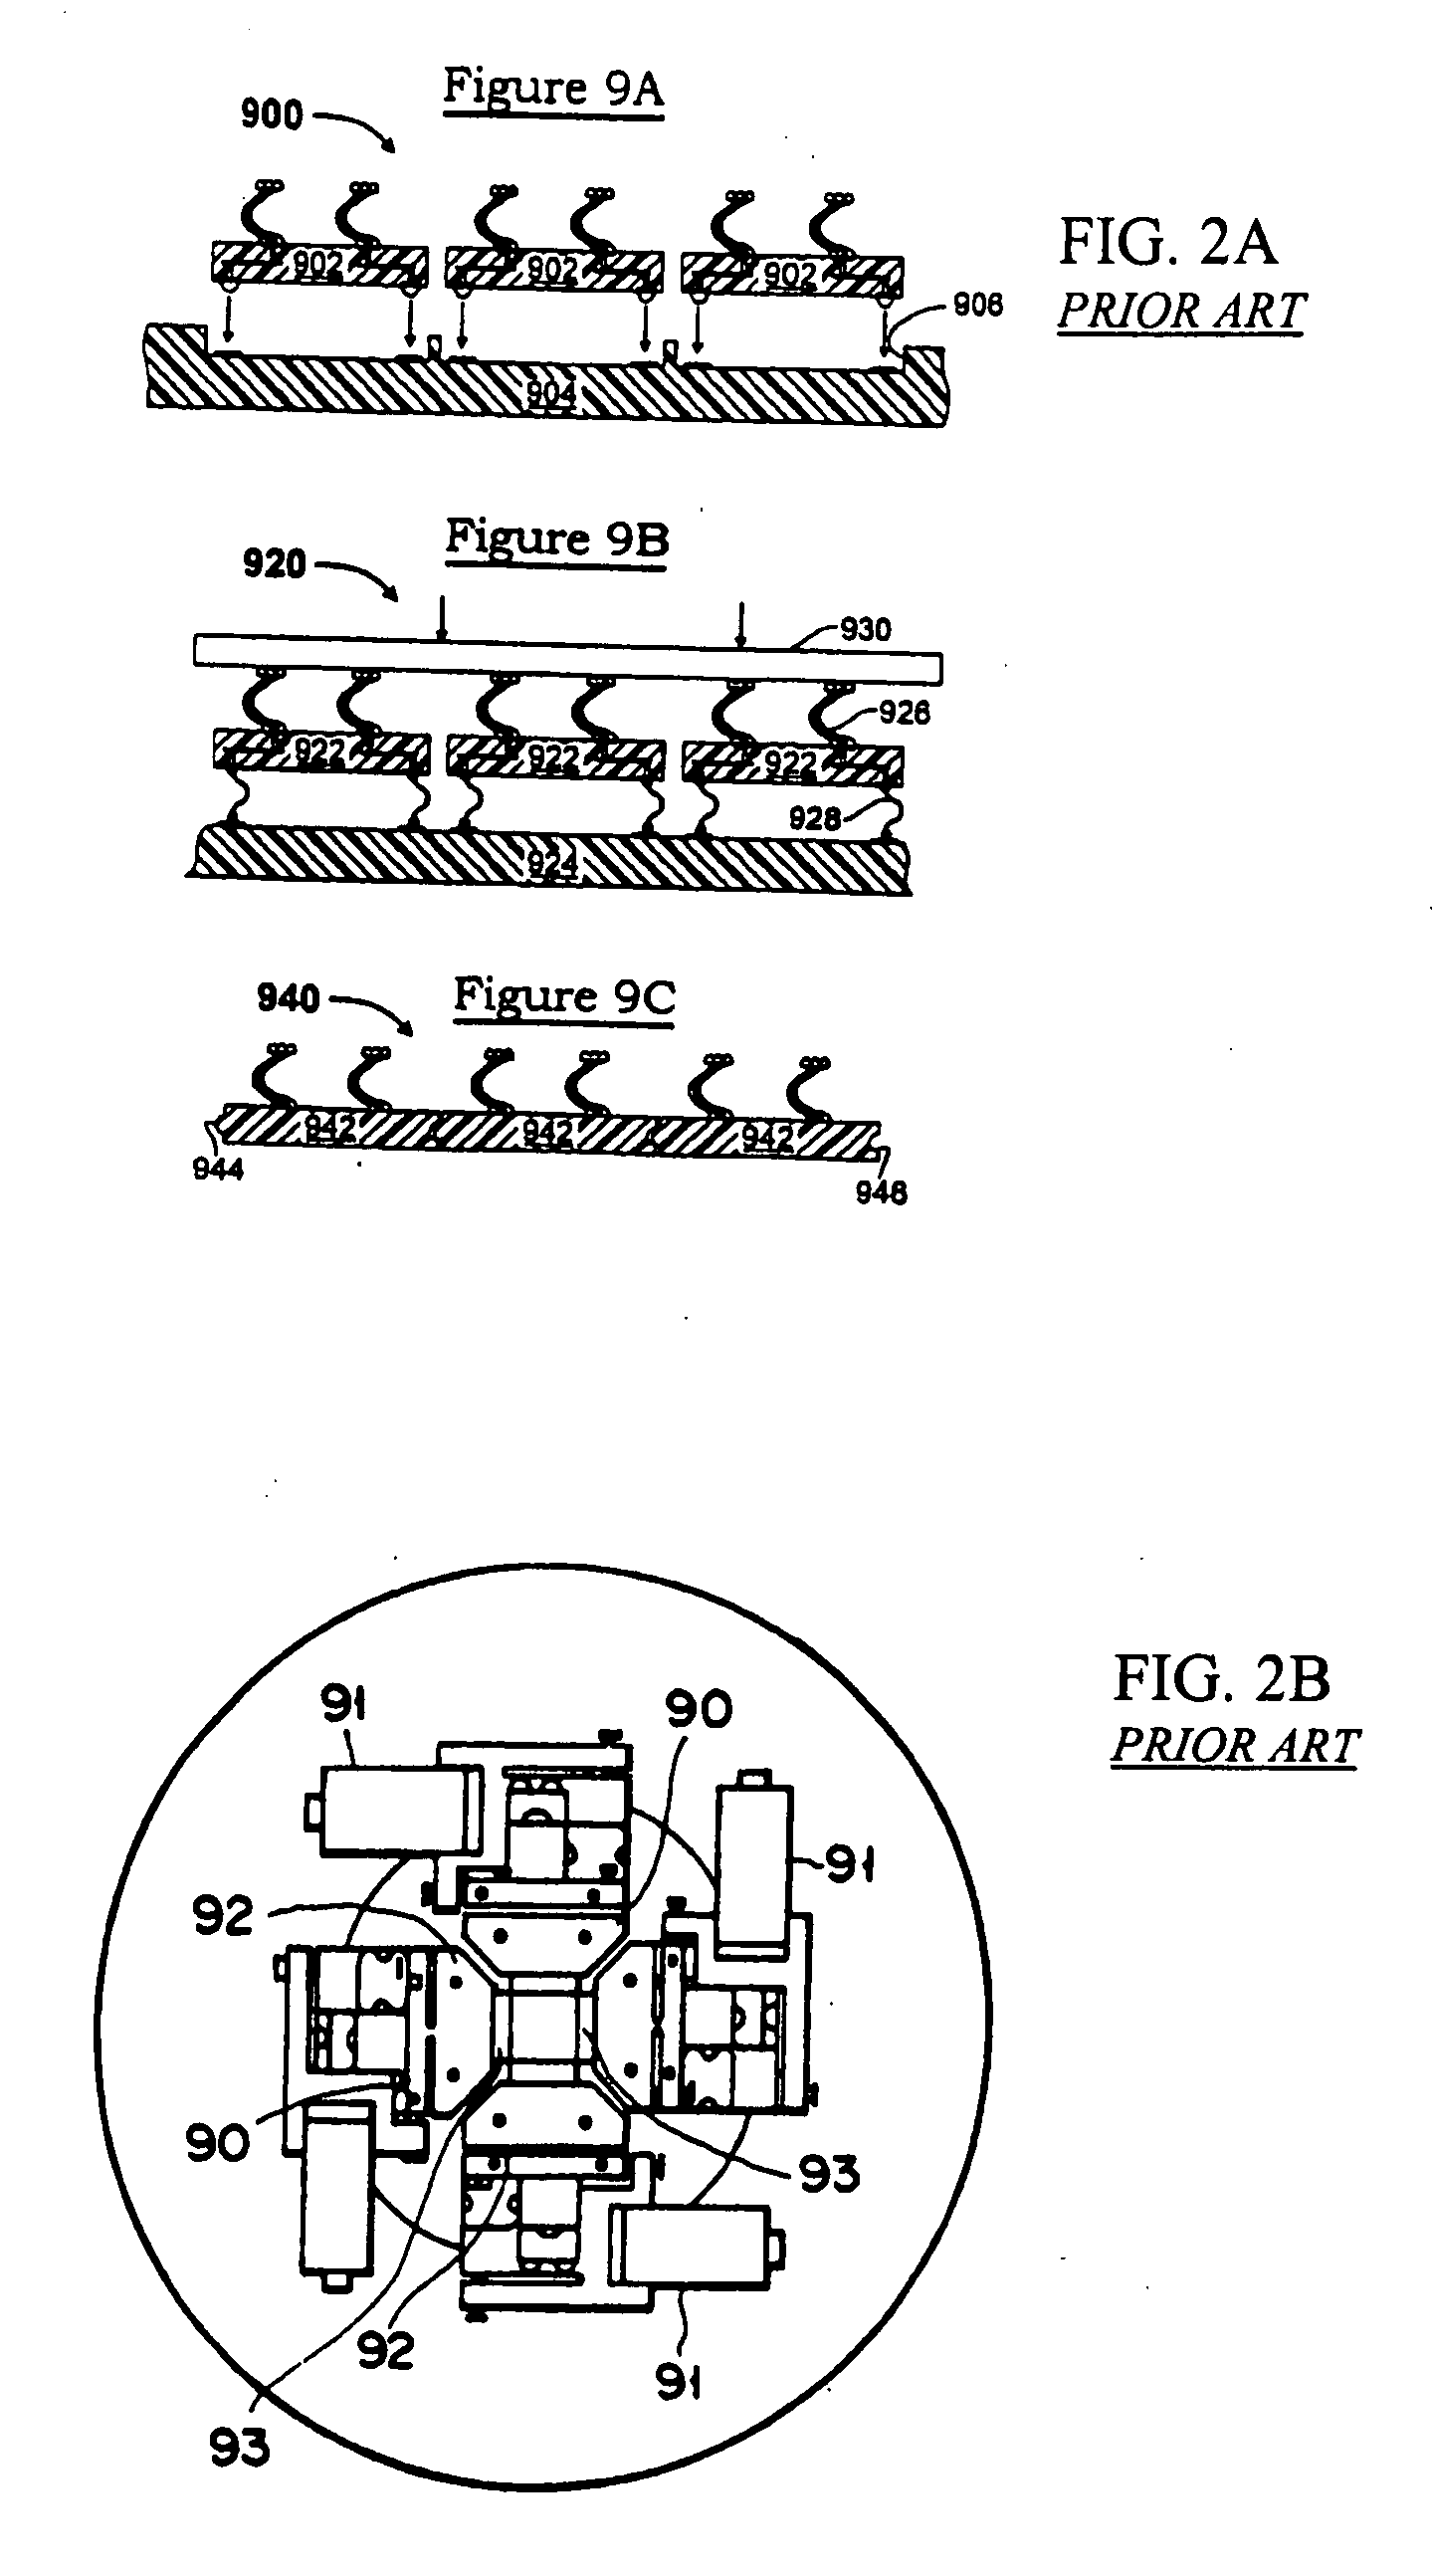 Method of forming probe card assembly